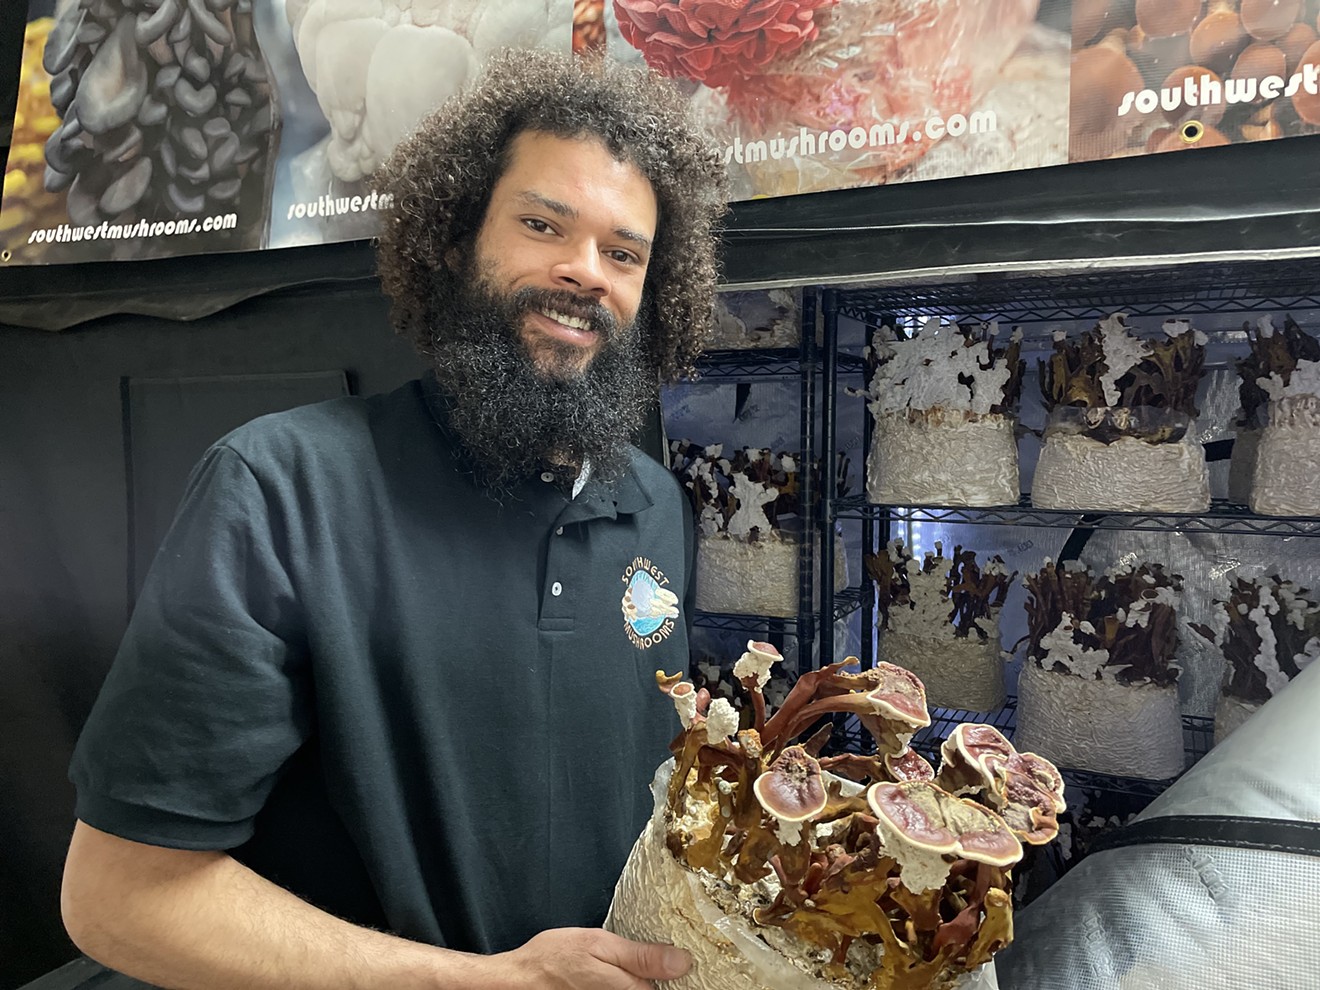 Michael Crowe started Southwest Mushrooms after more than a decade as a hobbyist.